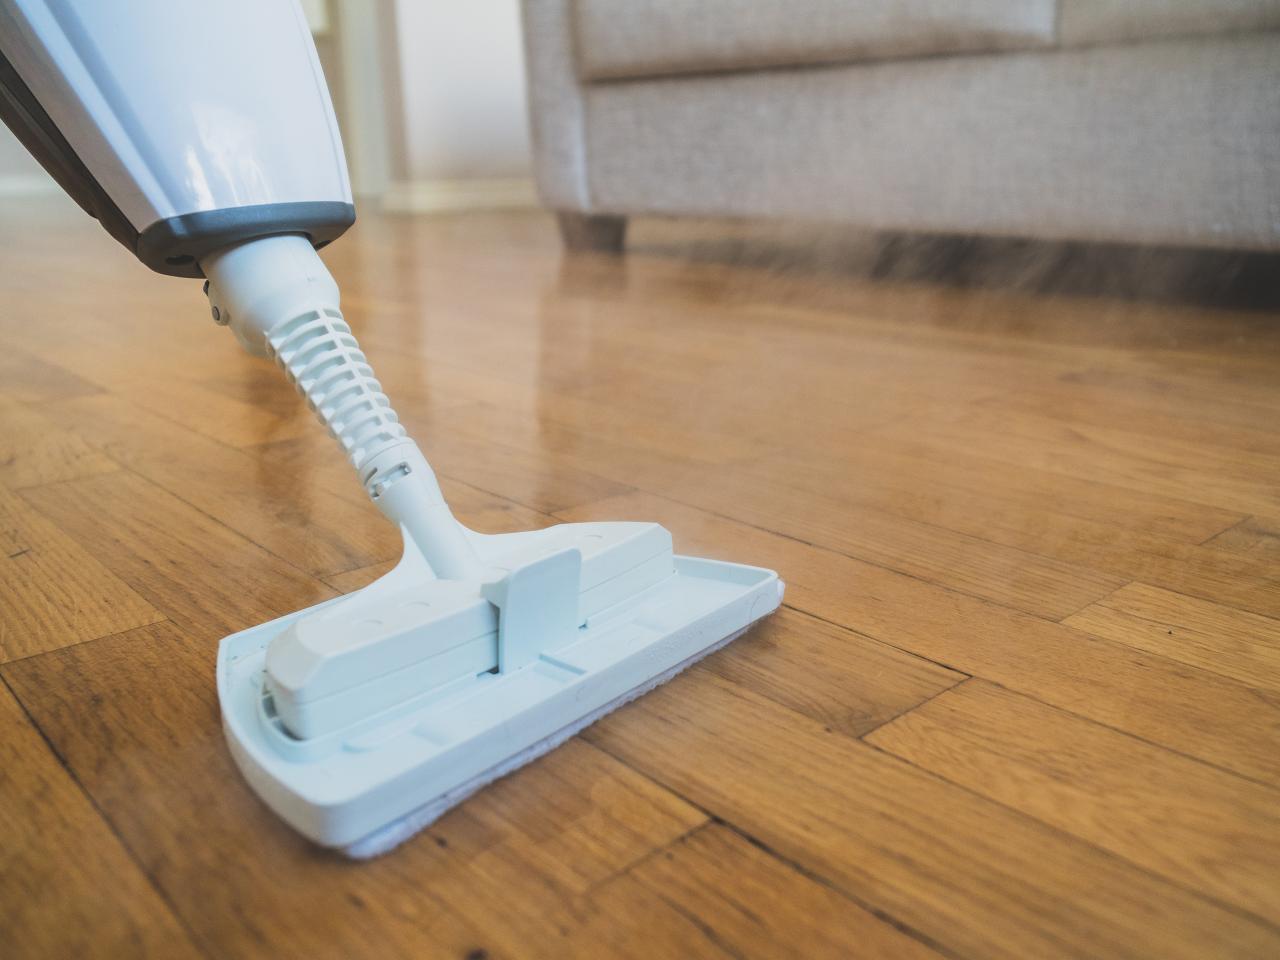 Damage Your Floor With A Steam Mop, Shark Steamer On Laminate Floors